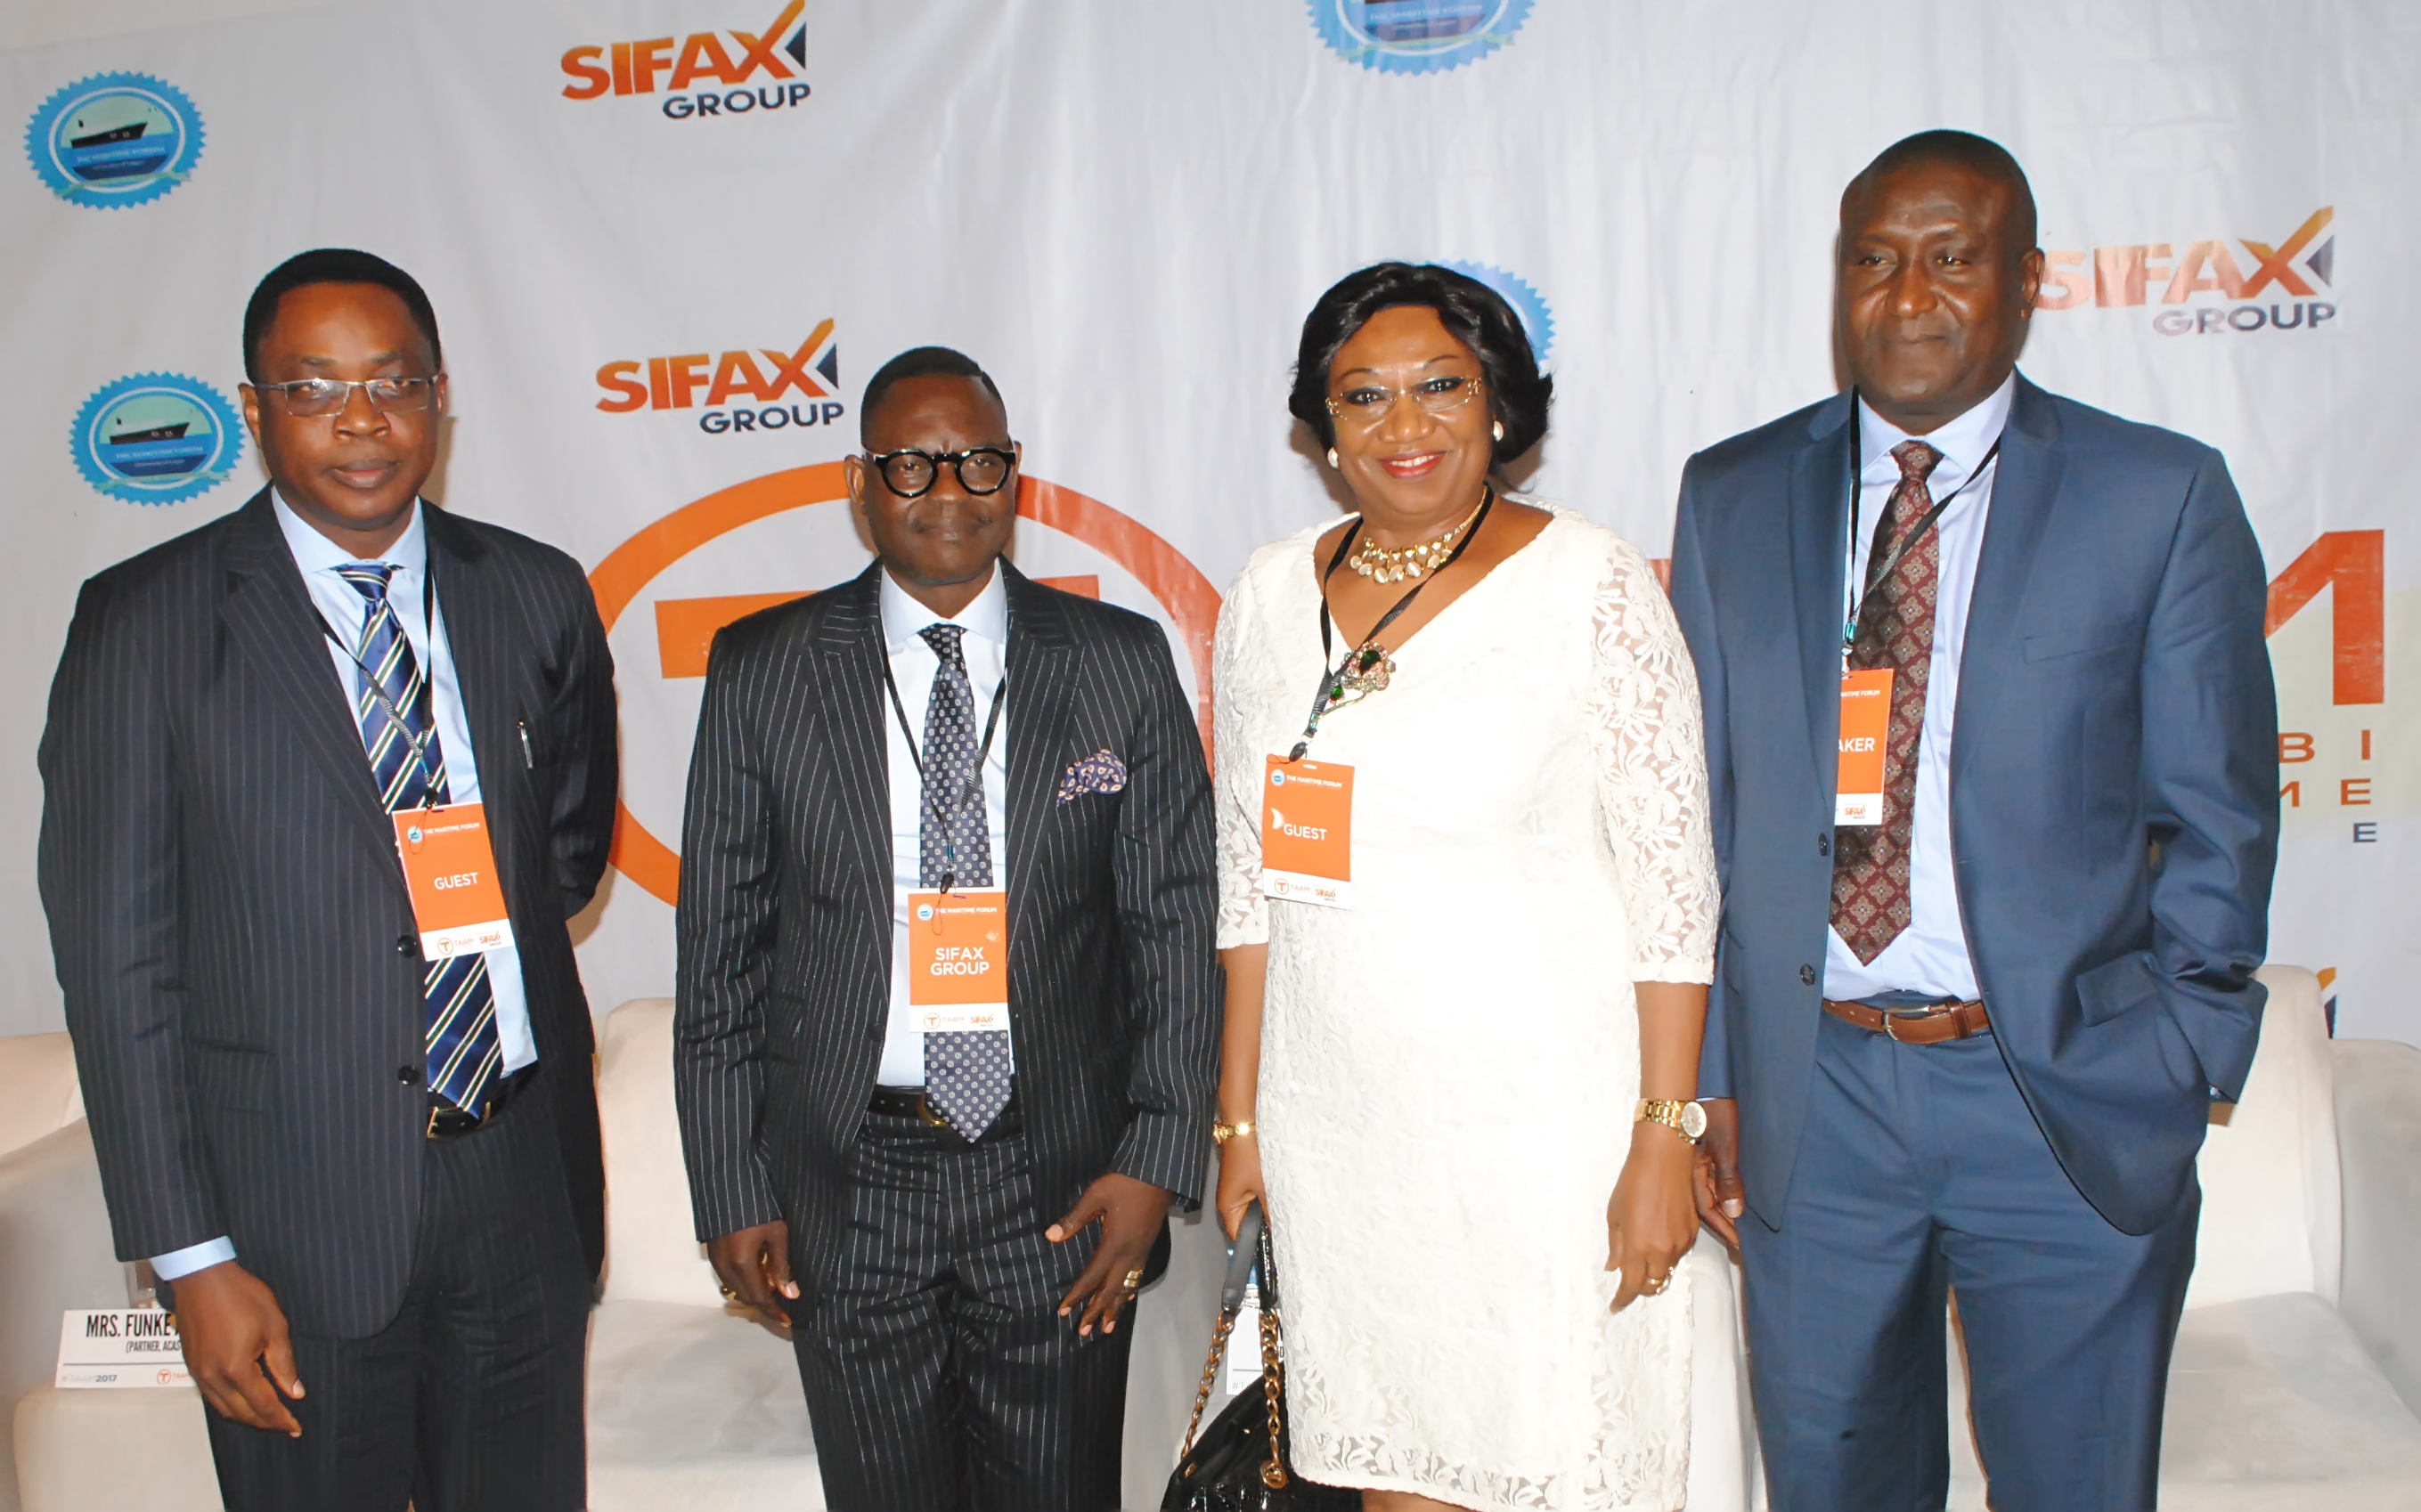 L-R: Anthony Ogadi, Head, Shipping Department, Nigerian Maritime Administration and Safety Agency; Dr. Taiwo Afolabi (MON), Group Executive Vice Chairman, SIFAX Group; Mrs. Ifeora Celine, Head, Complaints and Enforcement Unit, Nigerian Shippers’ Council and Mr. Stanley Yitnoe, Acting General Manager, Business Development, Nigerian Ports Authority.